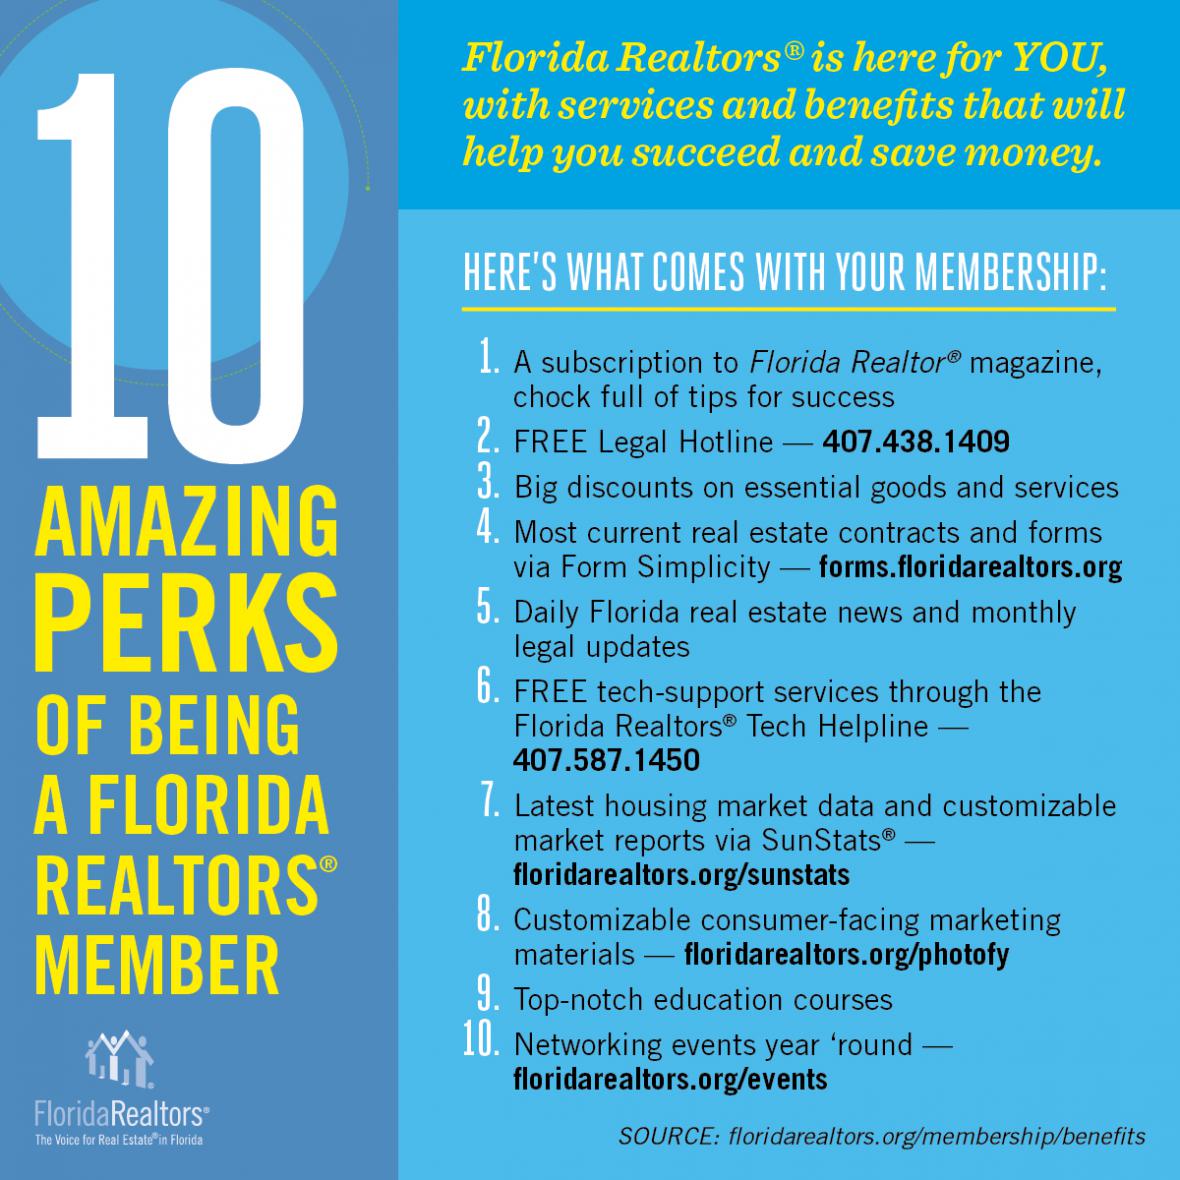 10 amazing perks of being a Florida Realtors member infographic